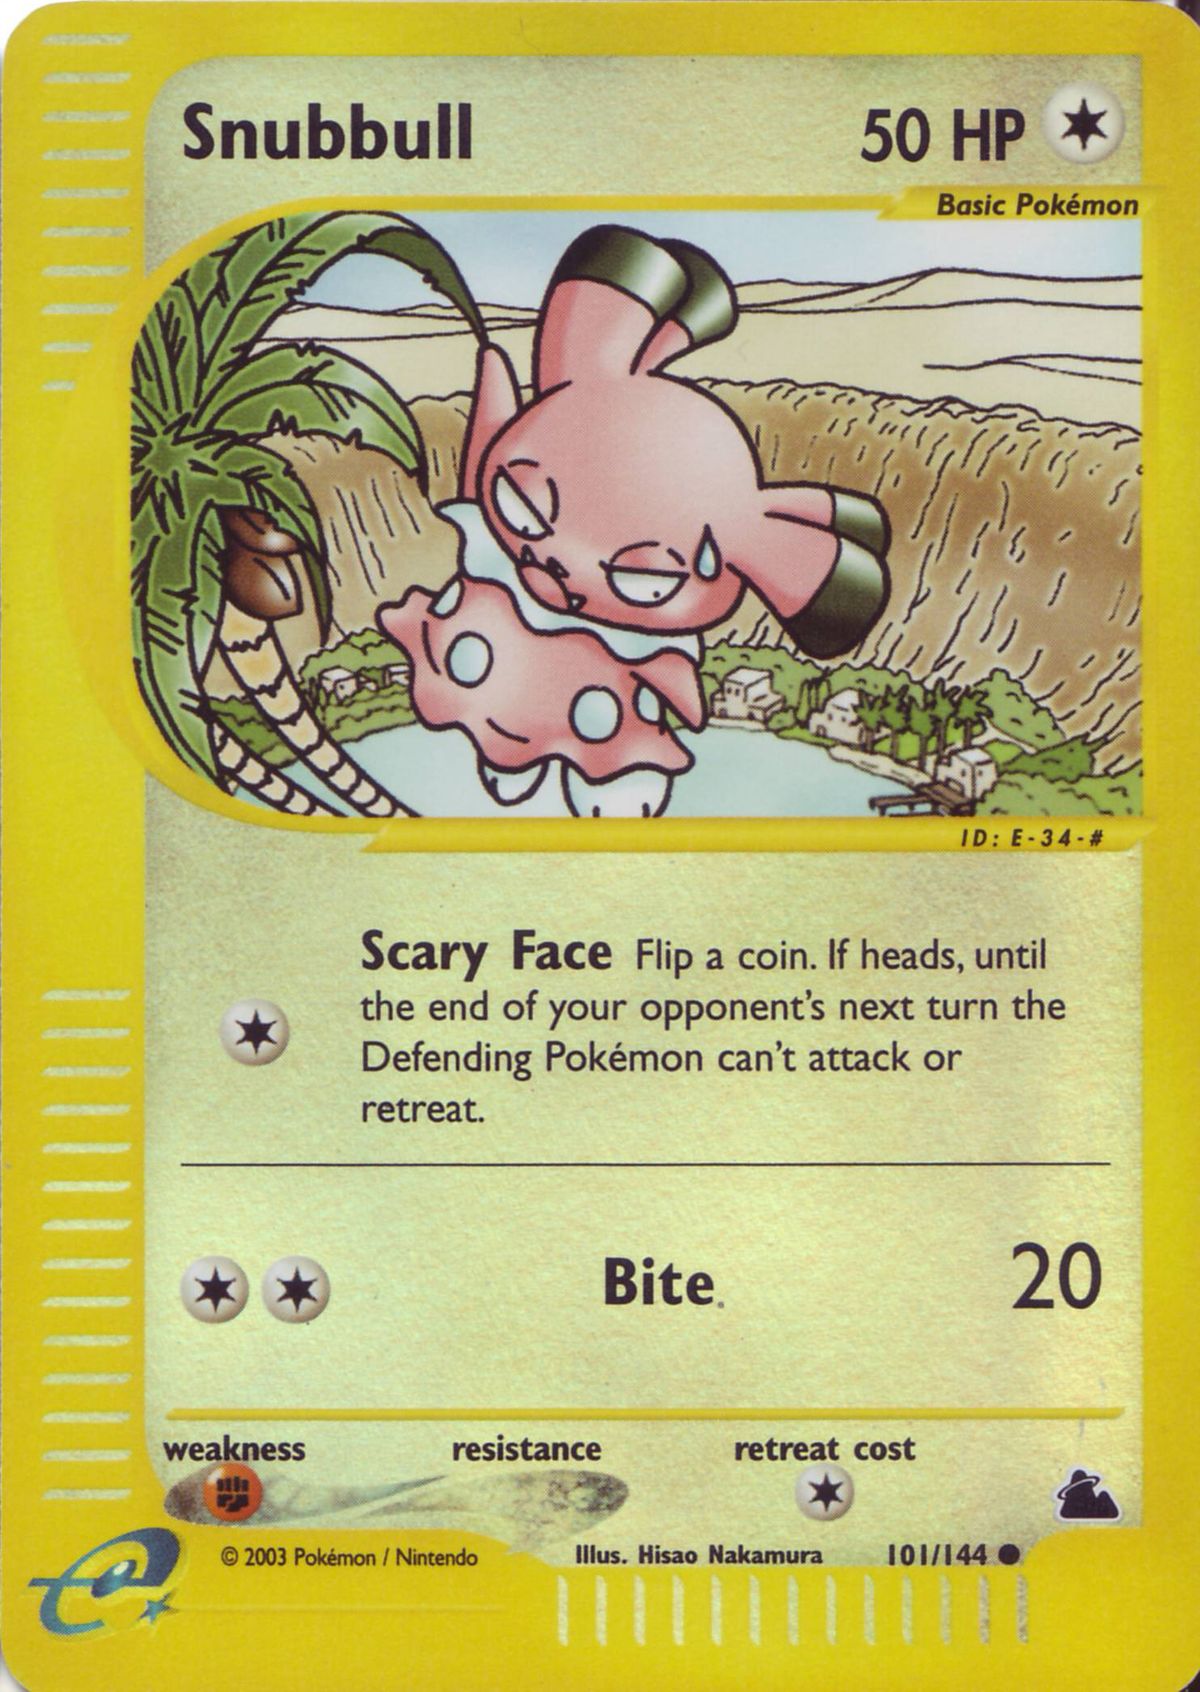 209 Snubbull used Scary Face and Sleep Talk in the Game-Art-HQ Pokemon Gen  II Tribute!